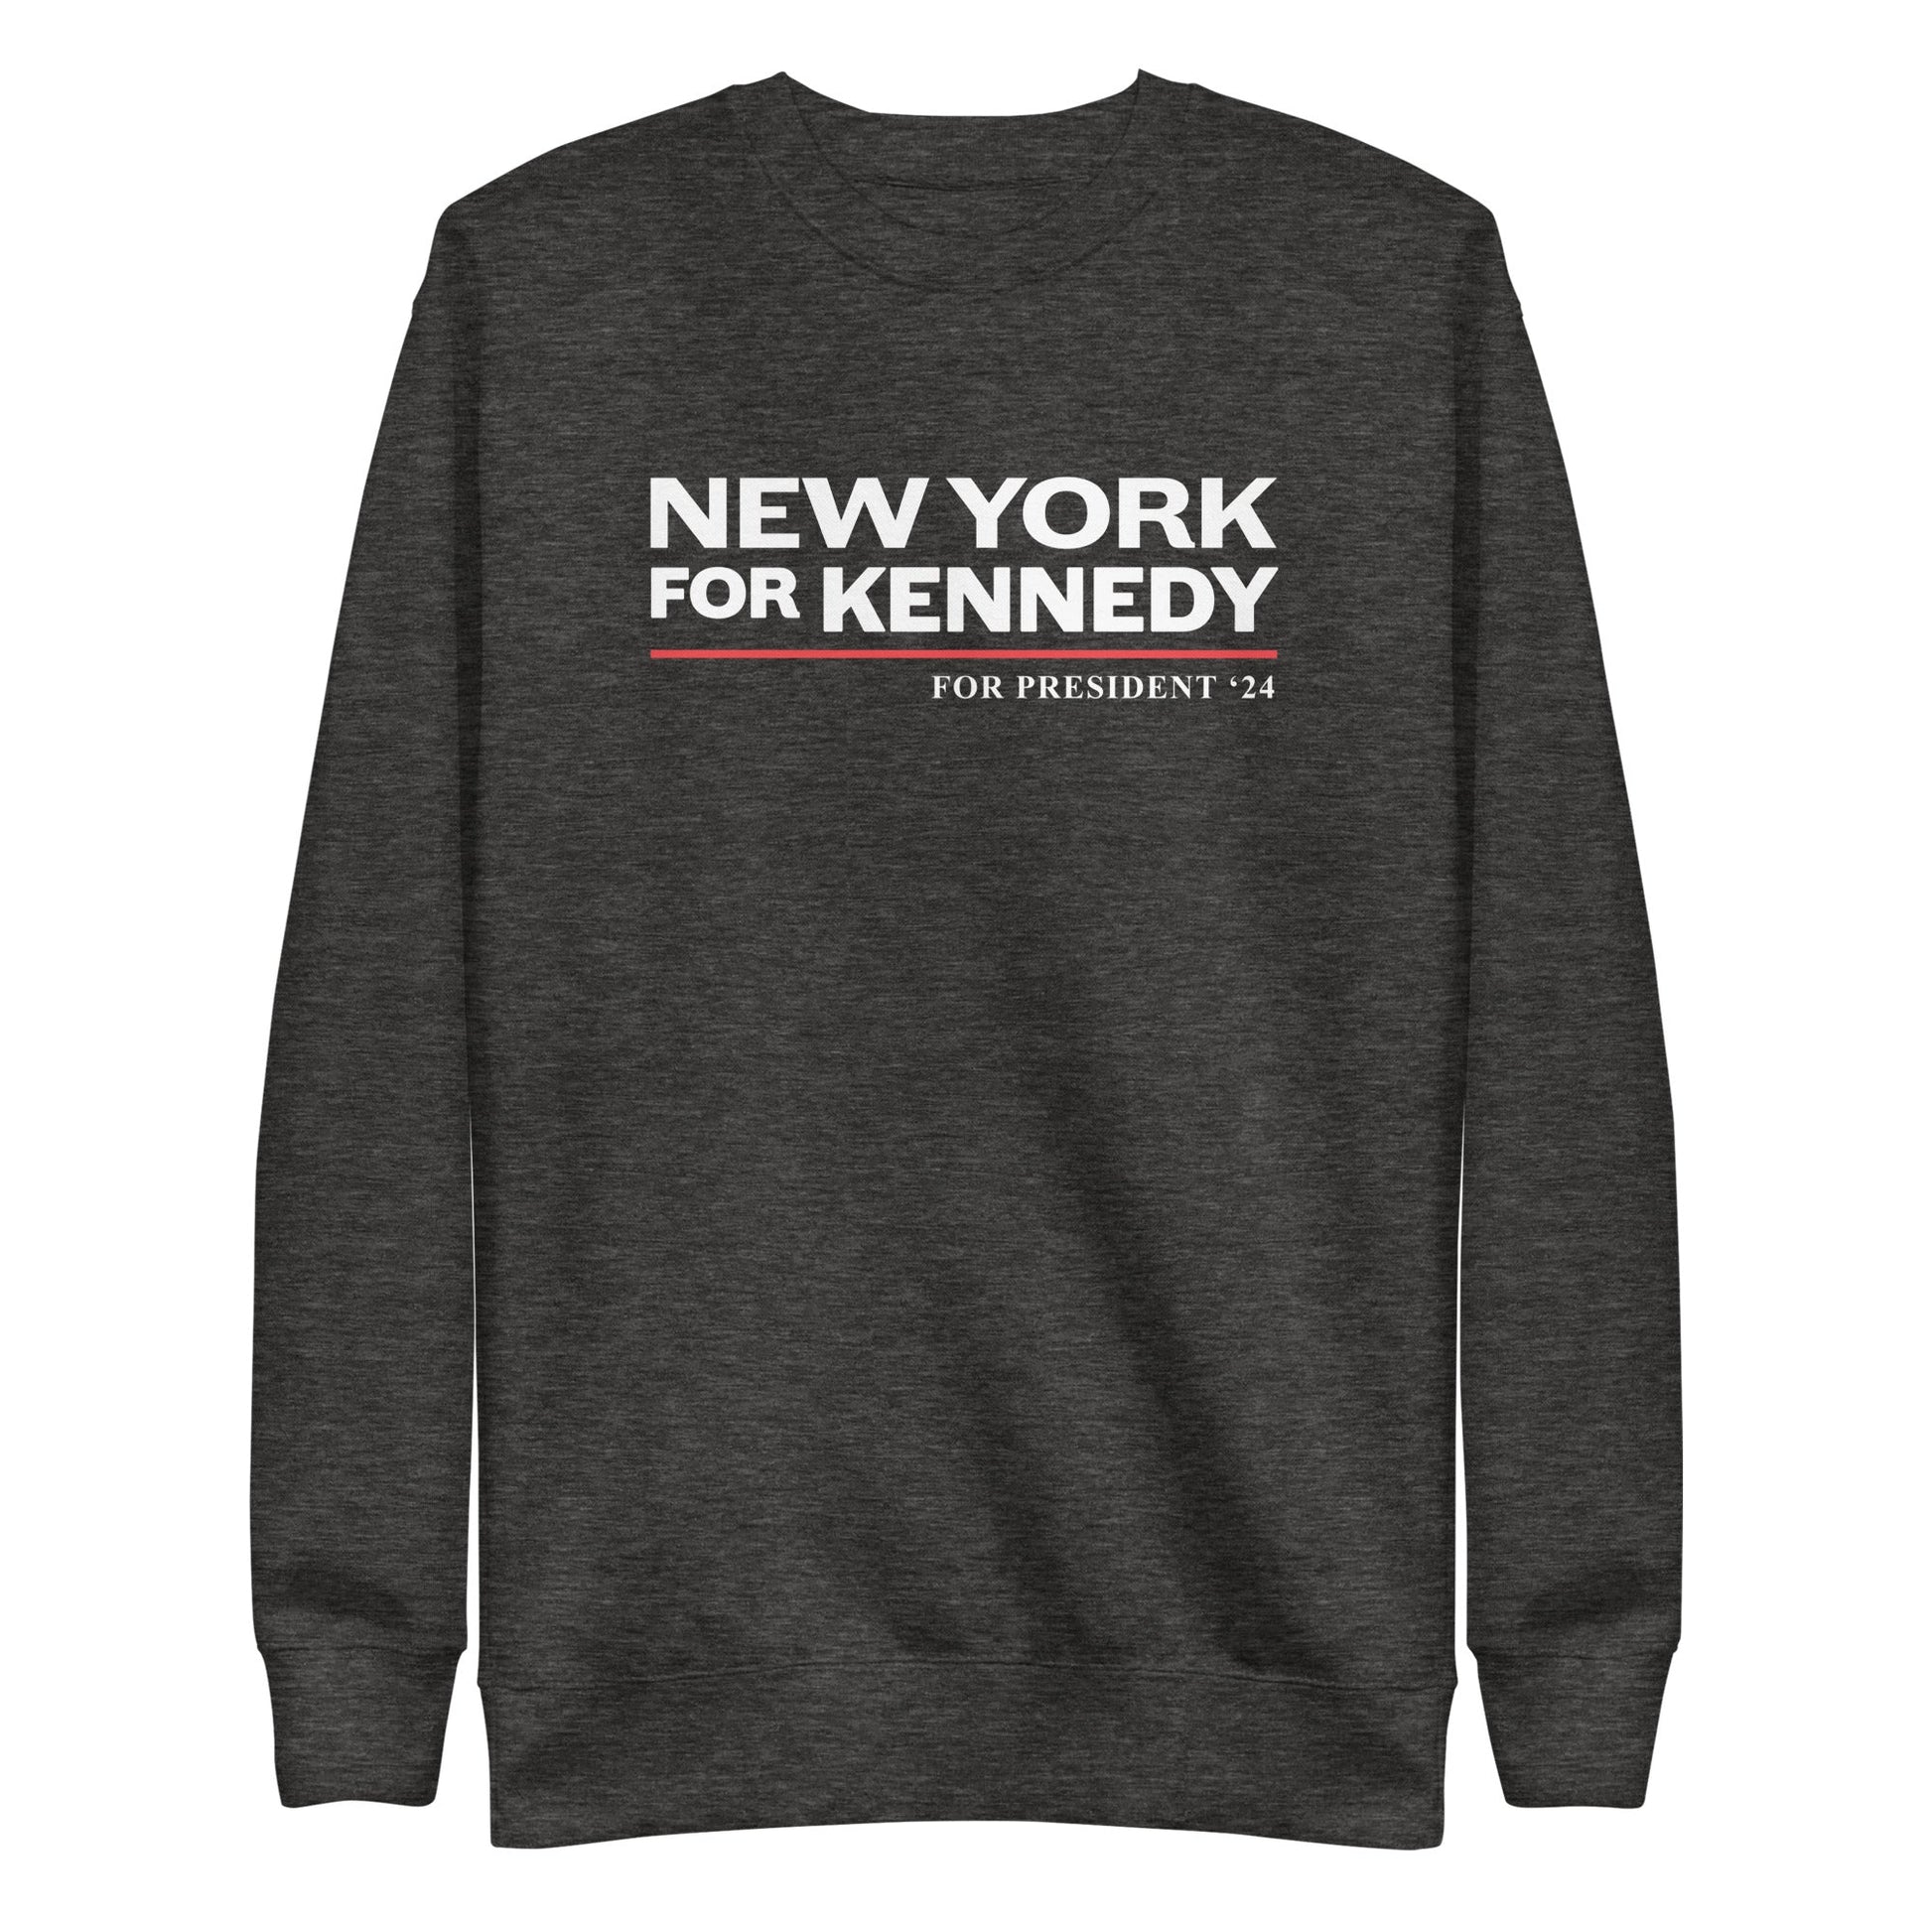 New York for Kennedy Unisex Sweatshirt - TEAM KENNEDY. All rights reserved